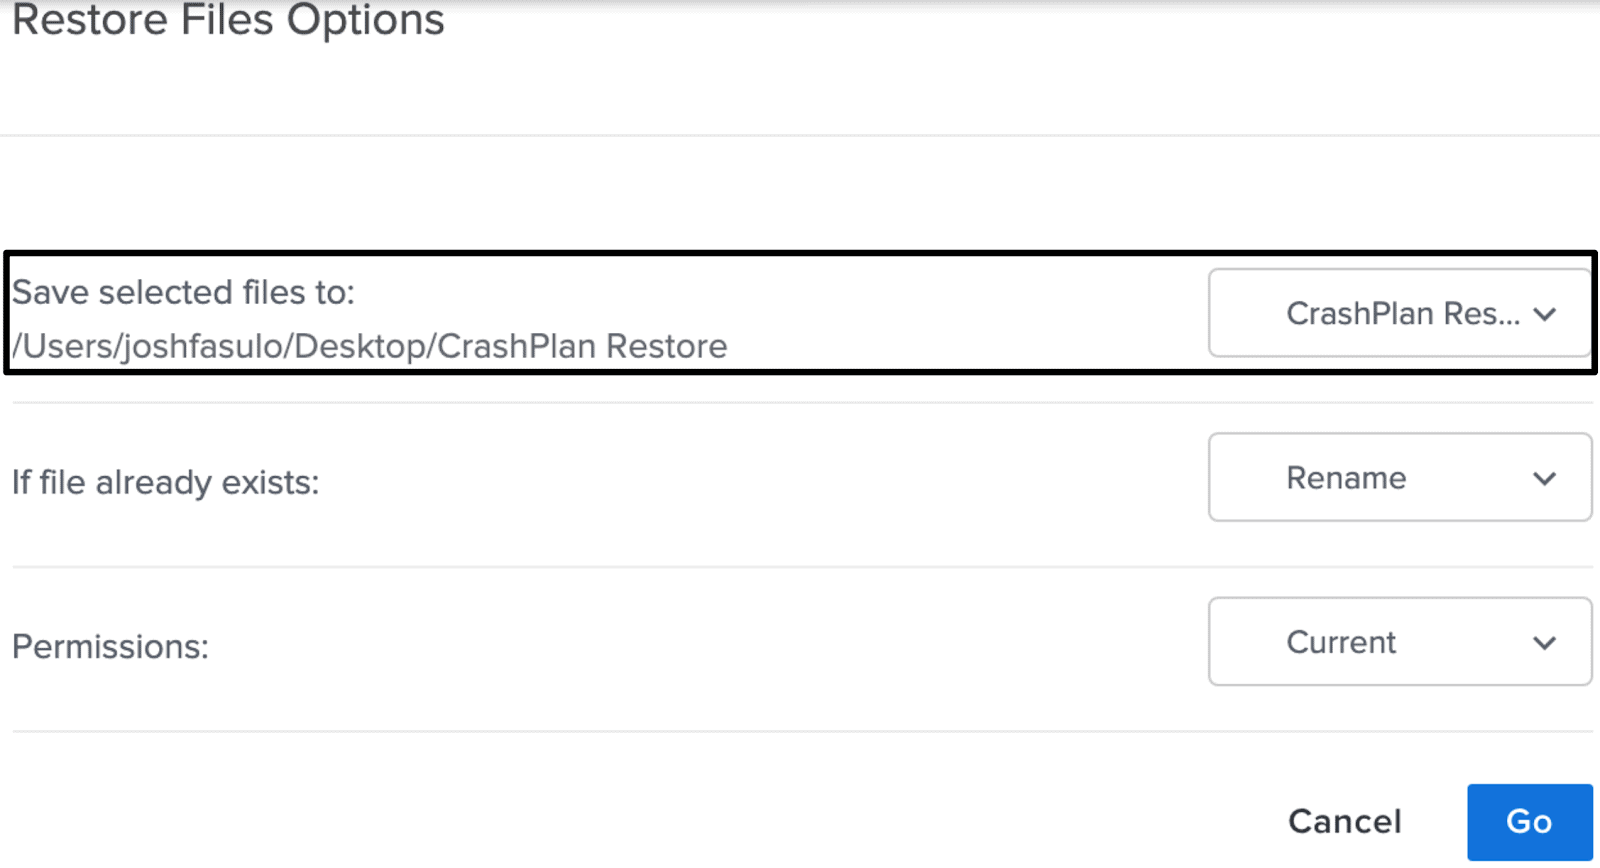 CrashPlan Restore Files Option - save selected files to location